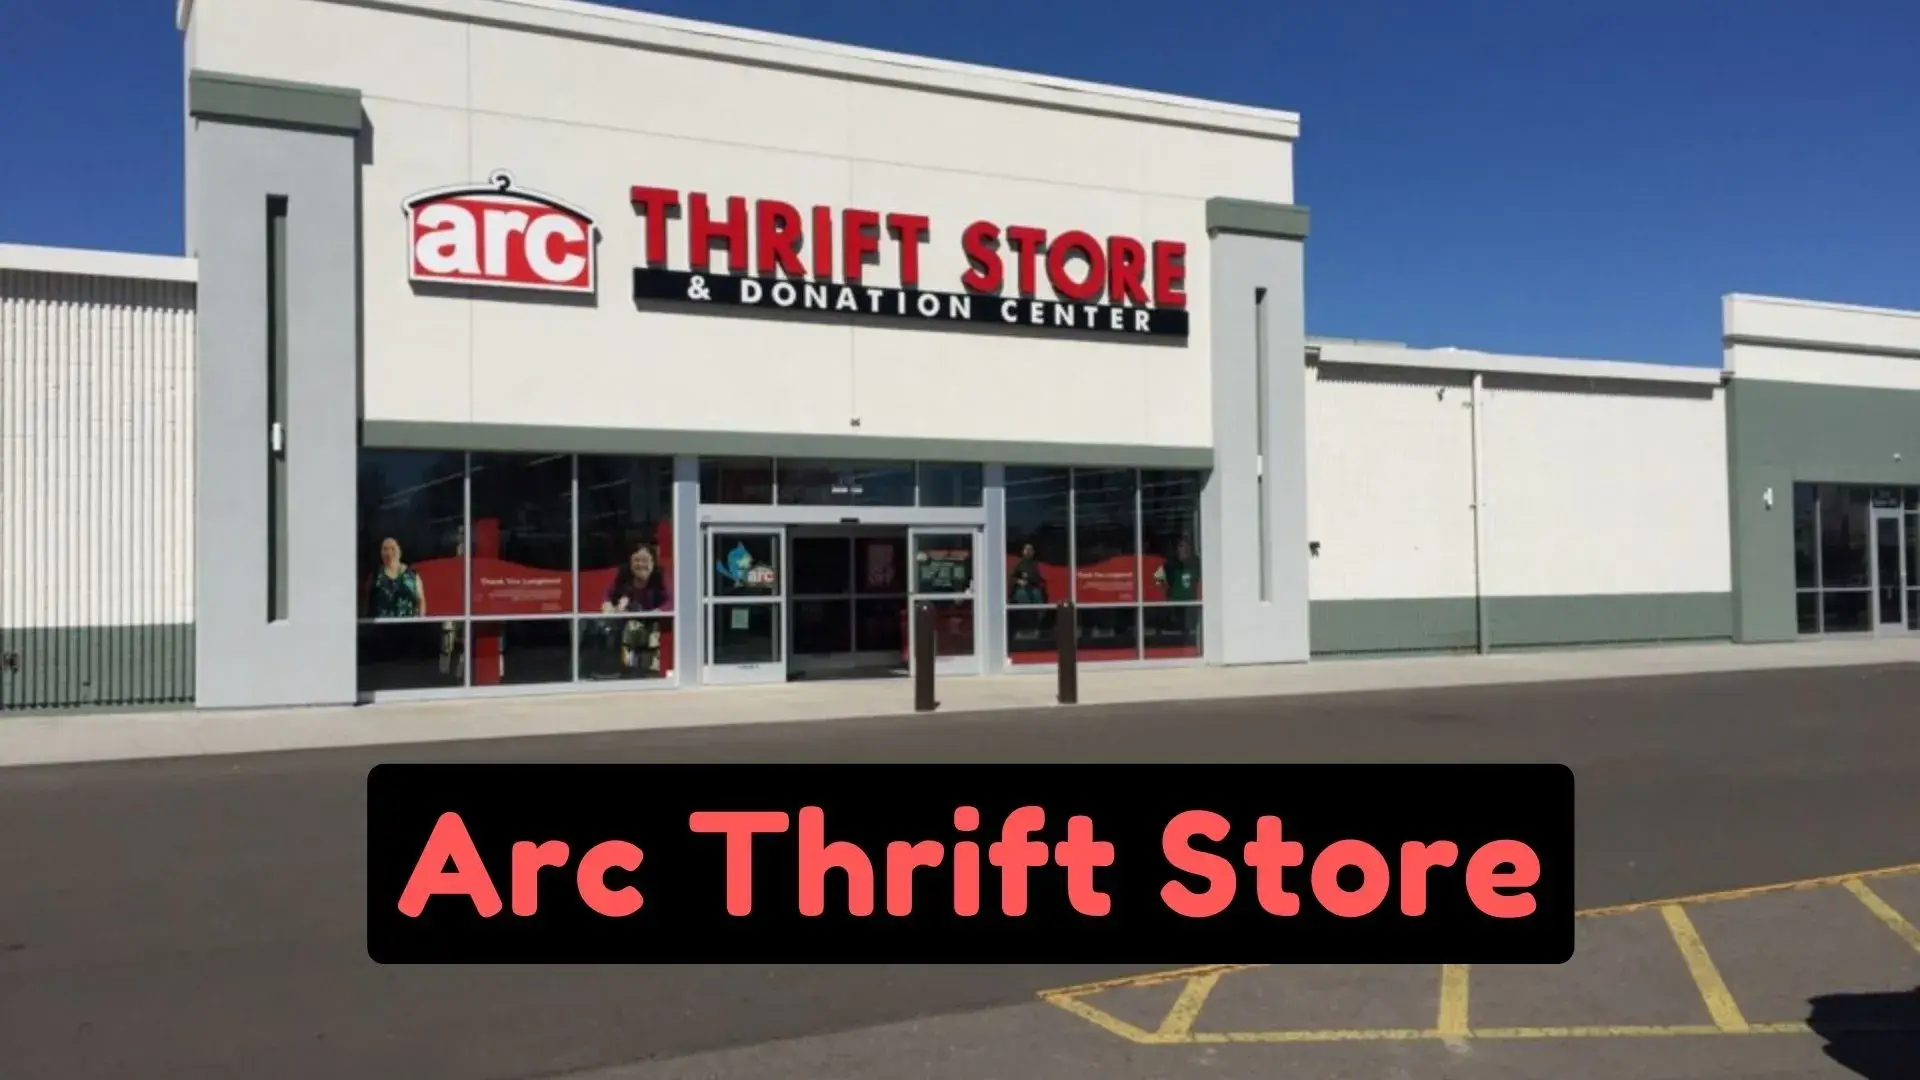 Quick Way To Find ARC Thrift Store Near Me